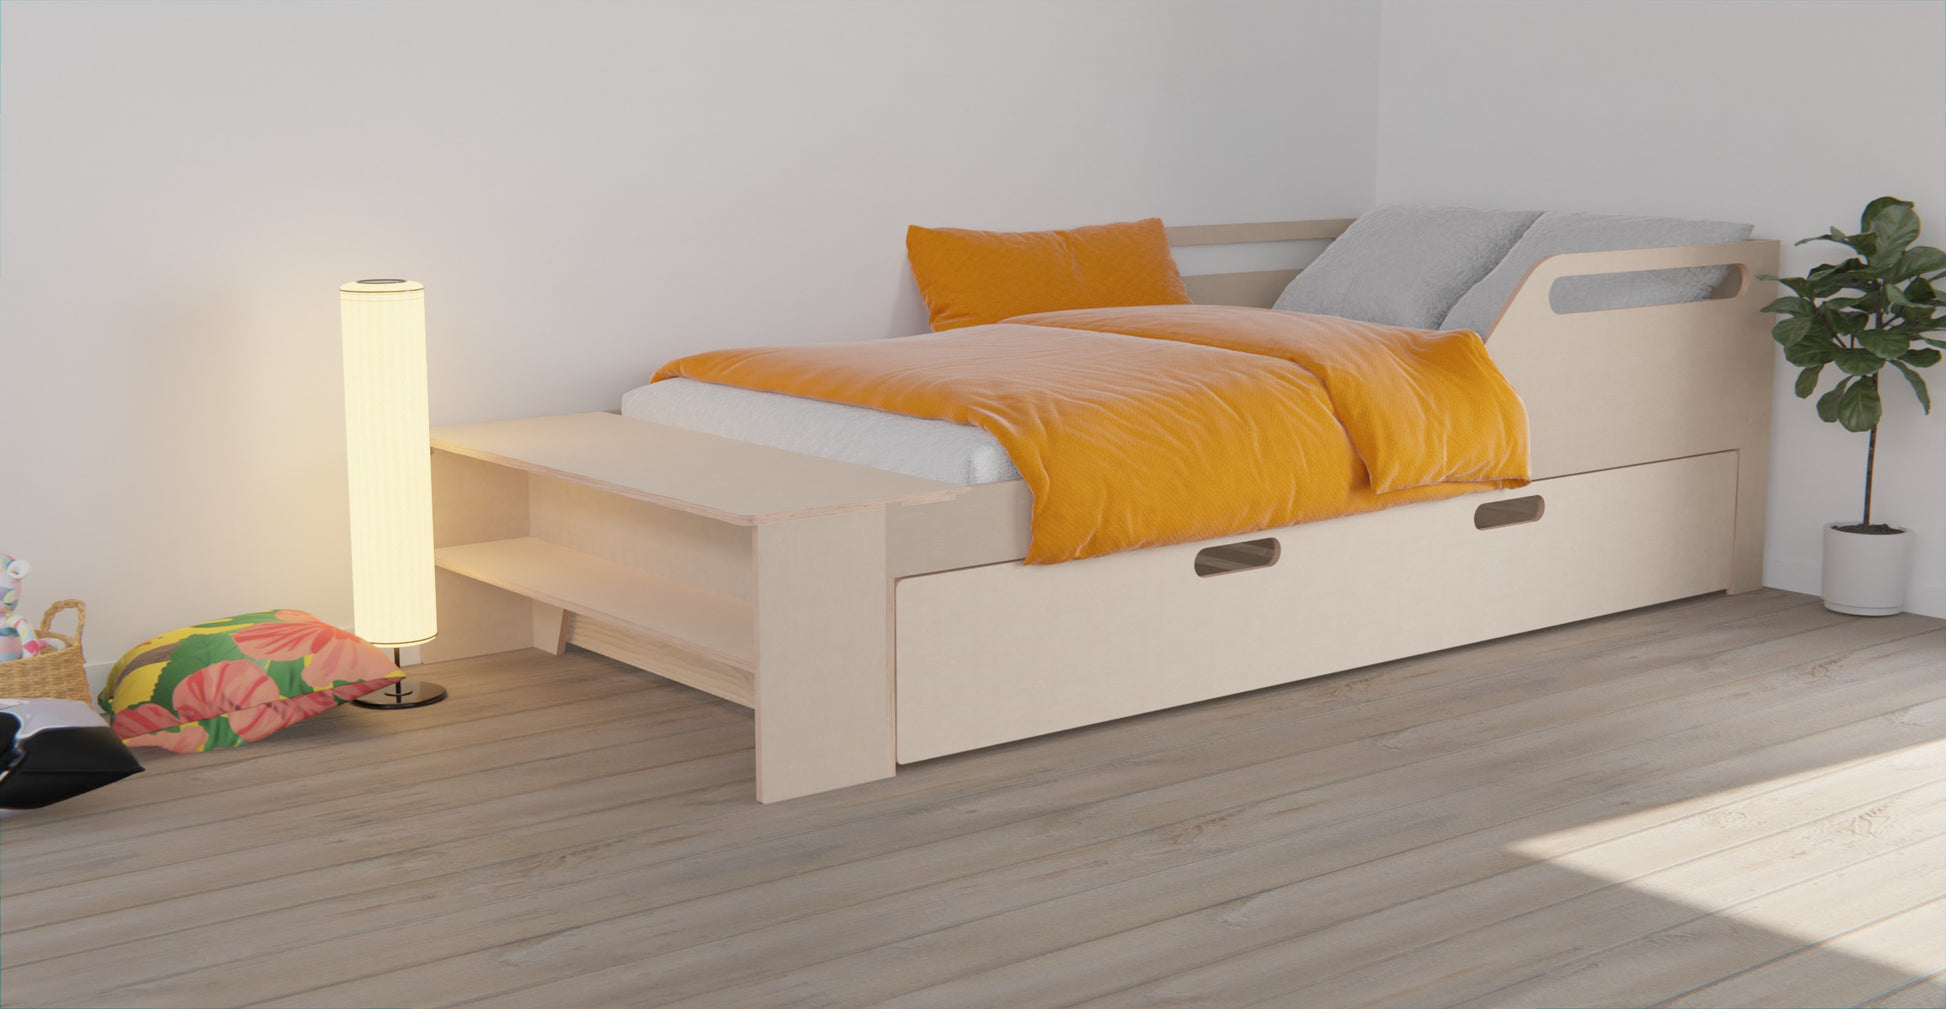 A blend of comfort and convenience - wooden bed frame with trundle bed. Effortlessly accommodate sleepovers.